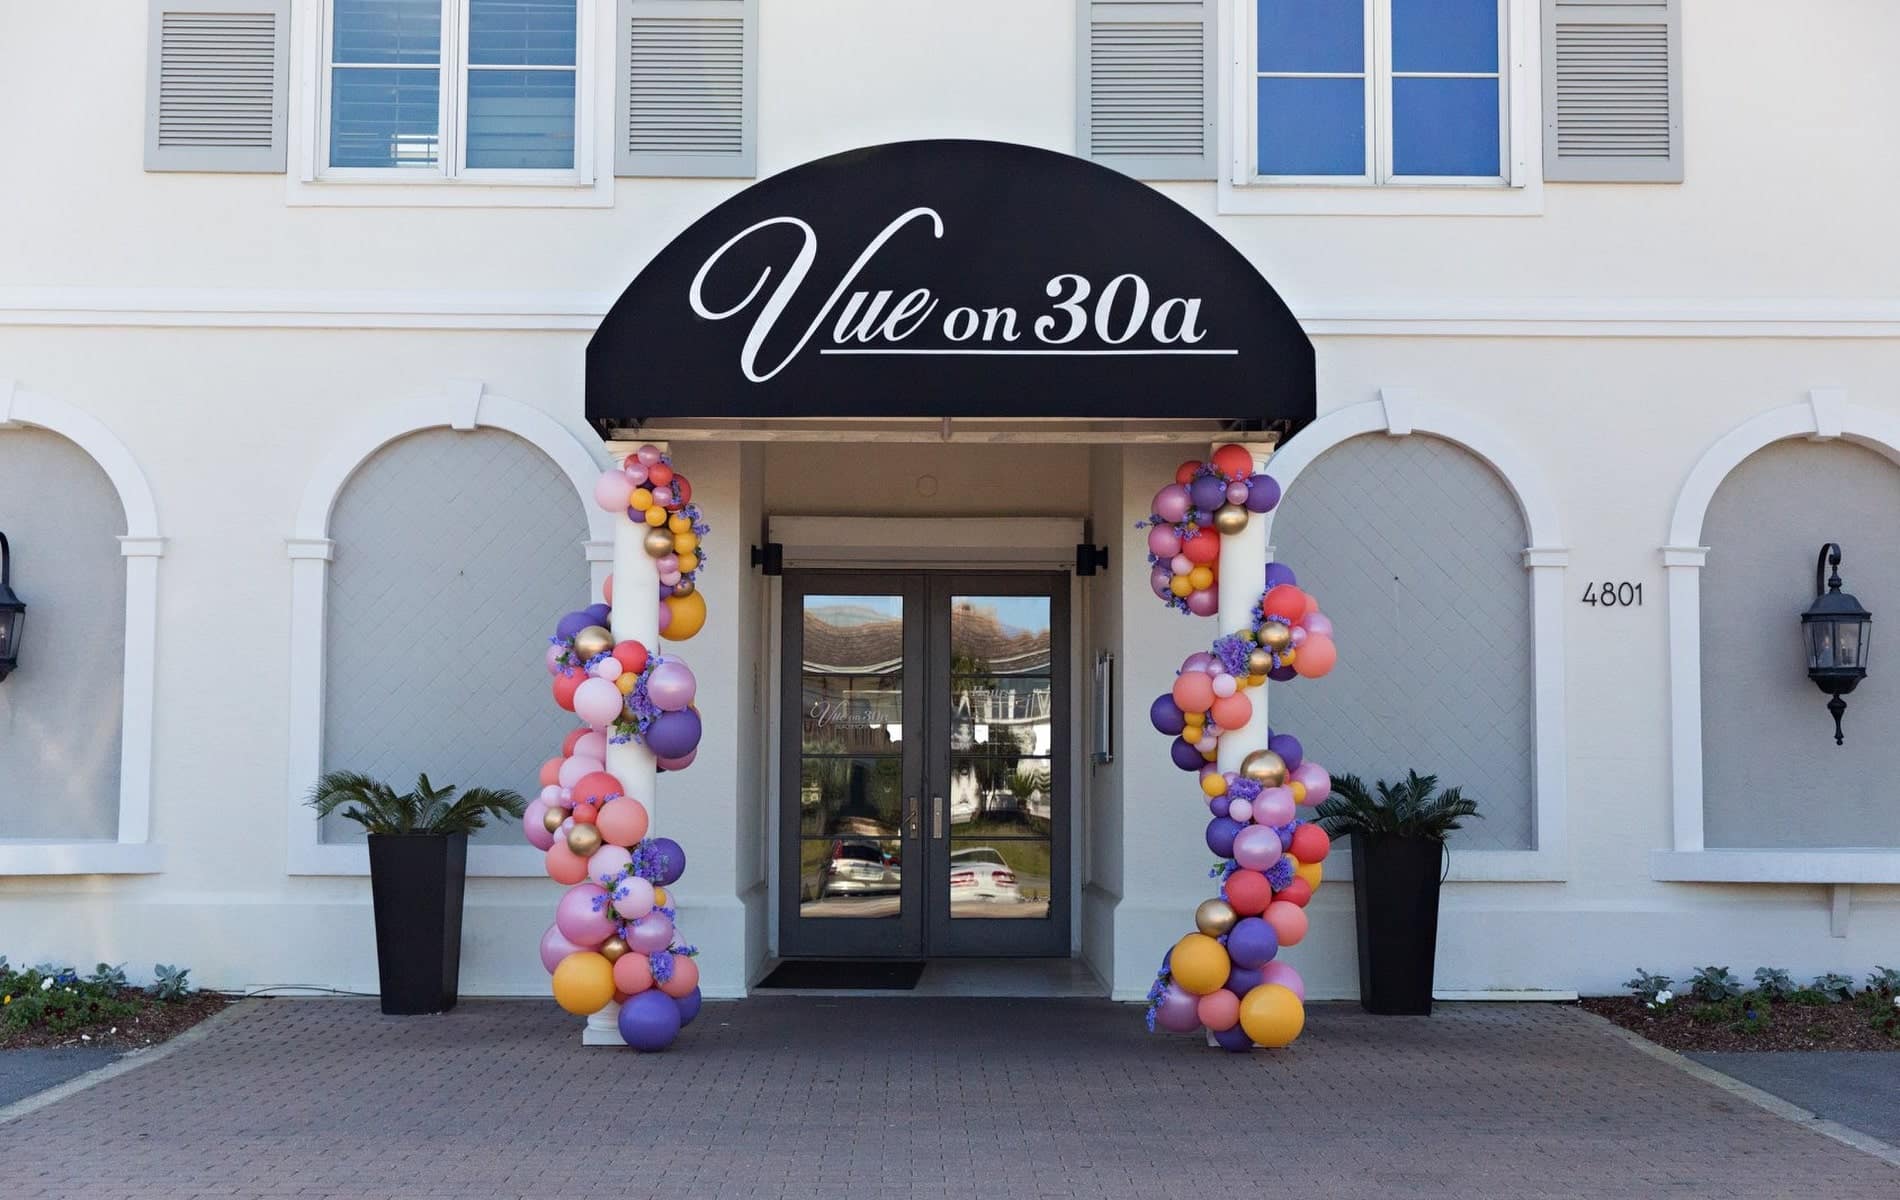 Caring & Sharing of South Walton to hold Spring Fashion Show at Vue on 30a